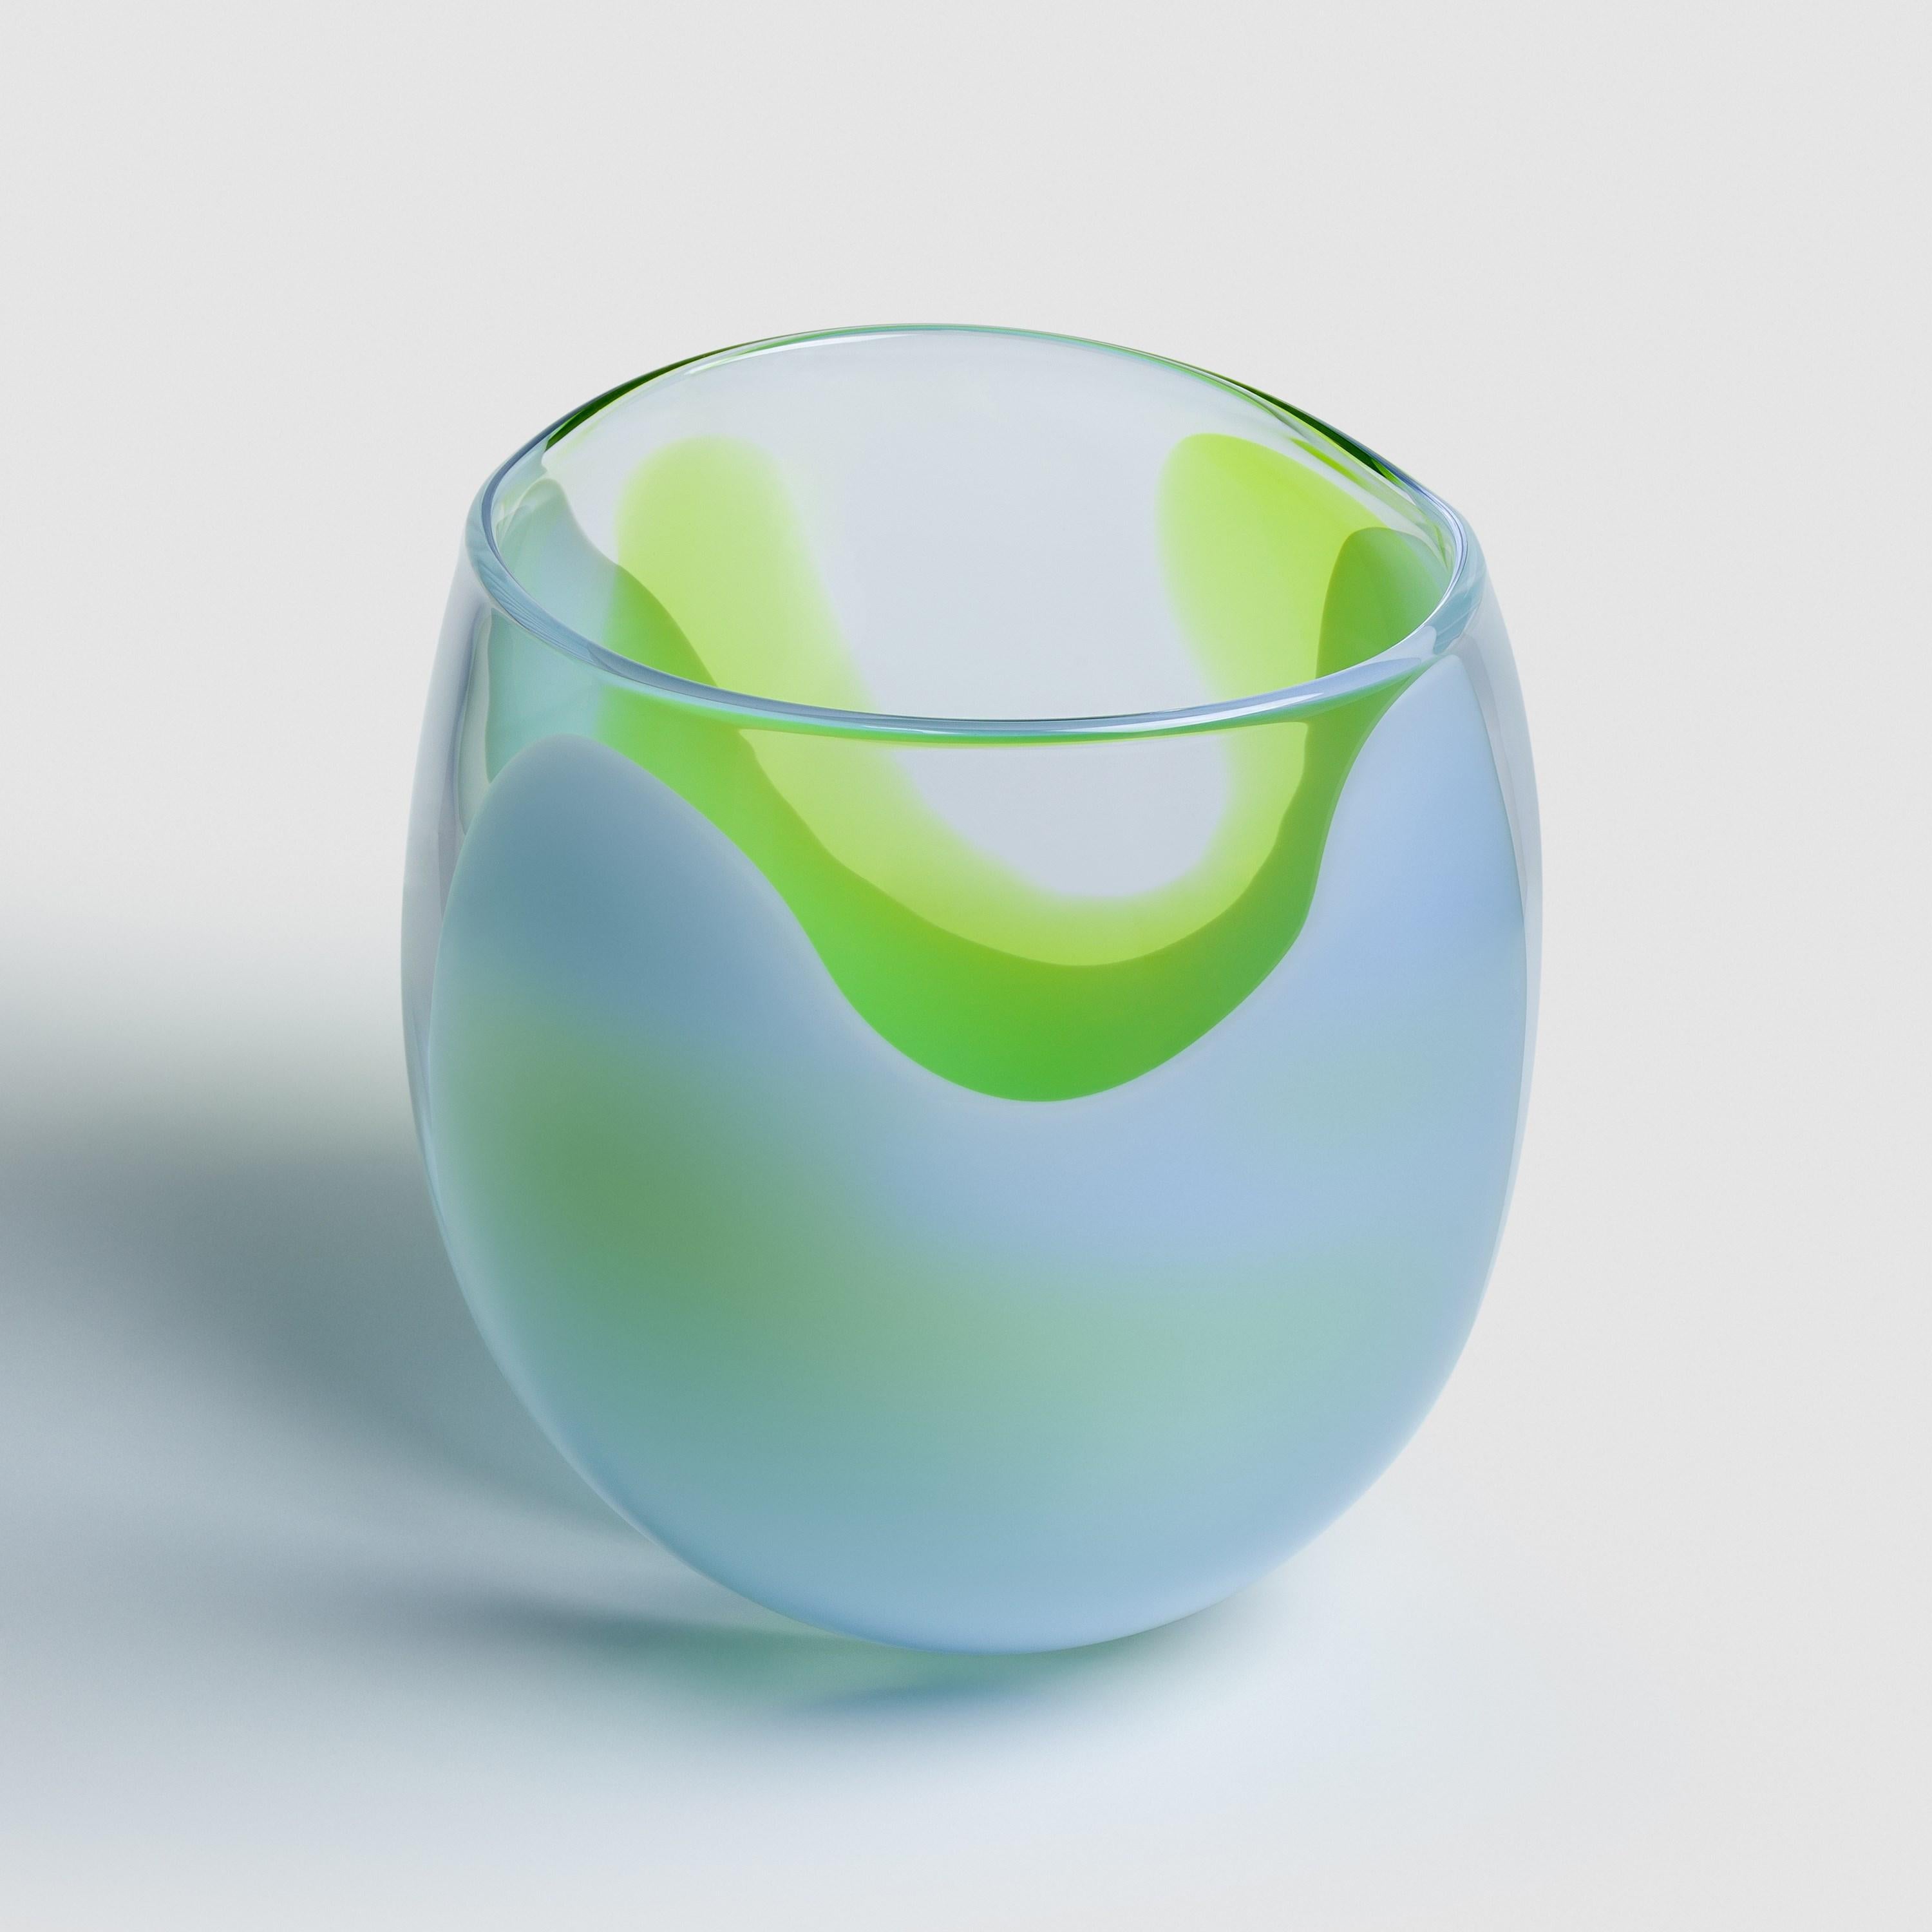 Hand-Crafted Waves No 637 is a blue & lime handblown glass sculptural bowl by Neil Wilkin For Sale